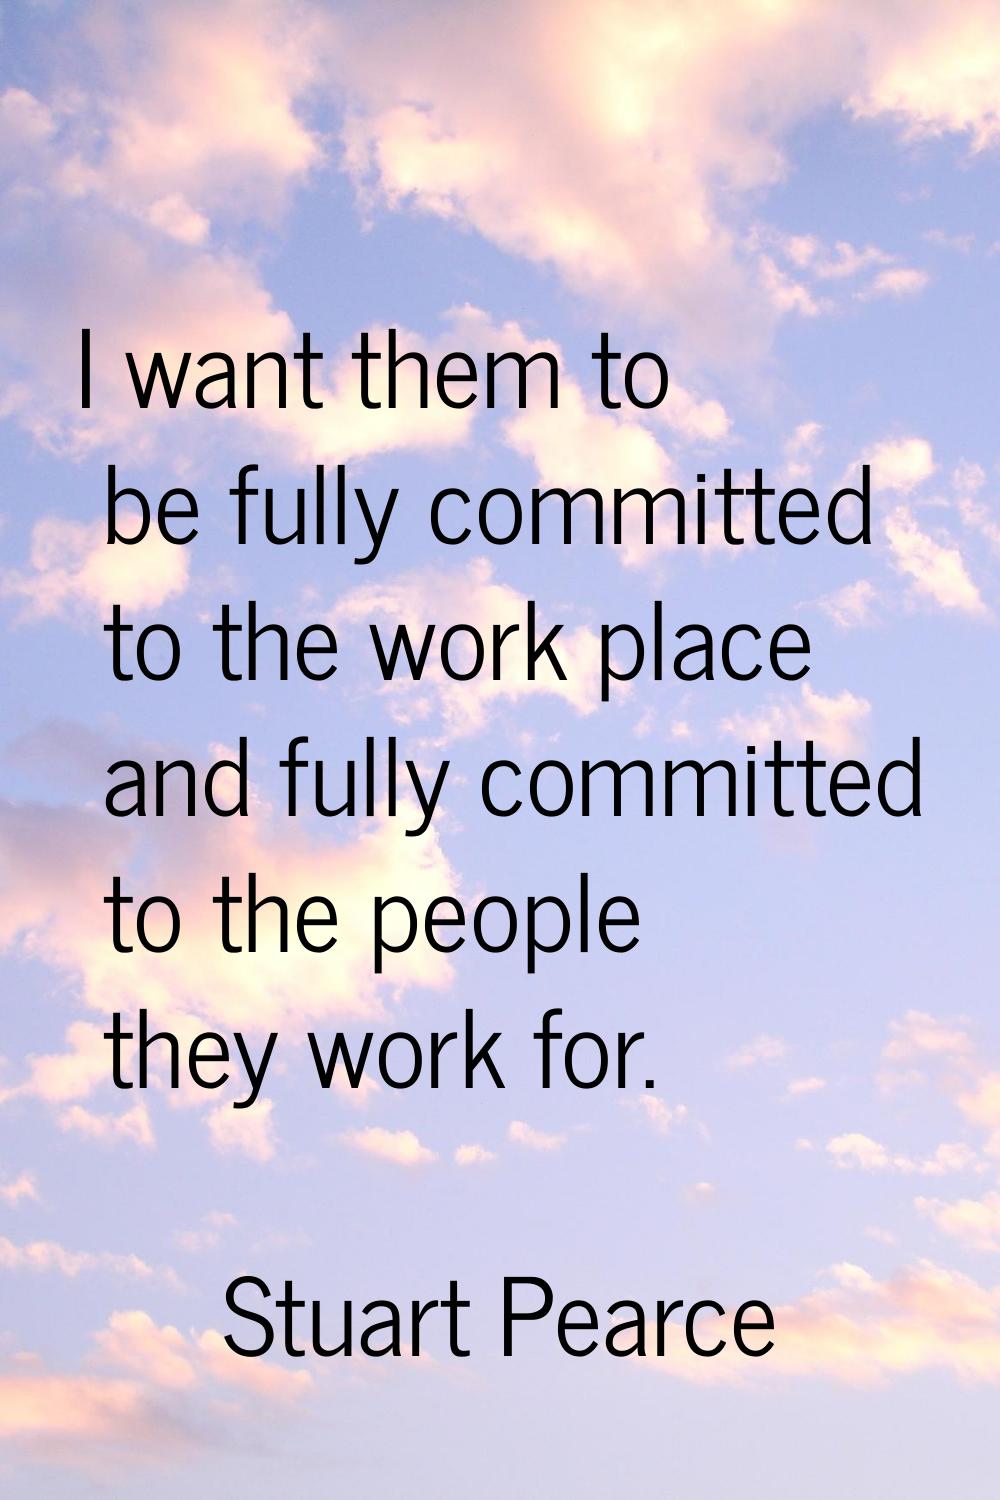 I want them to be fully committed to the work place and fully committed to the people they work for